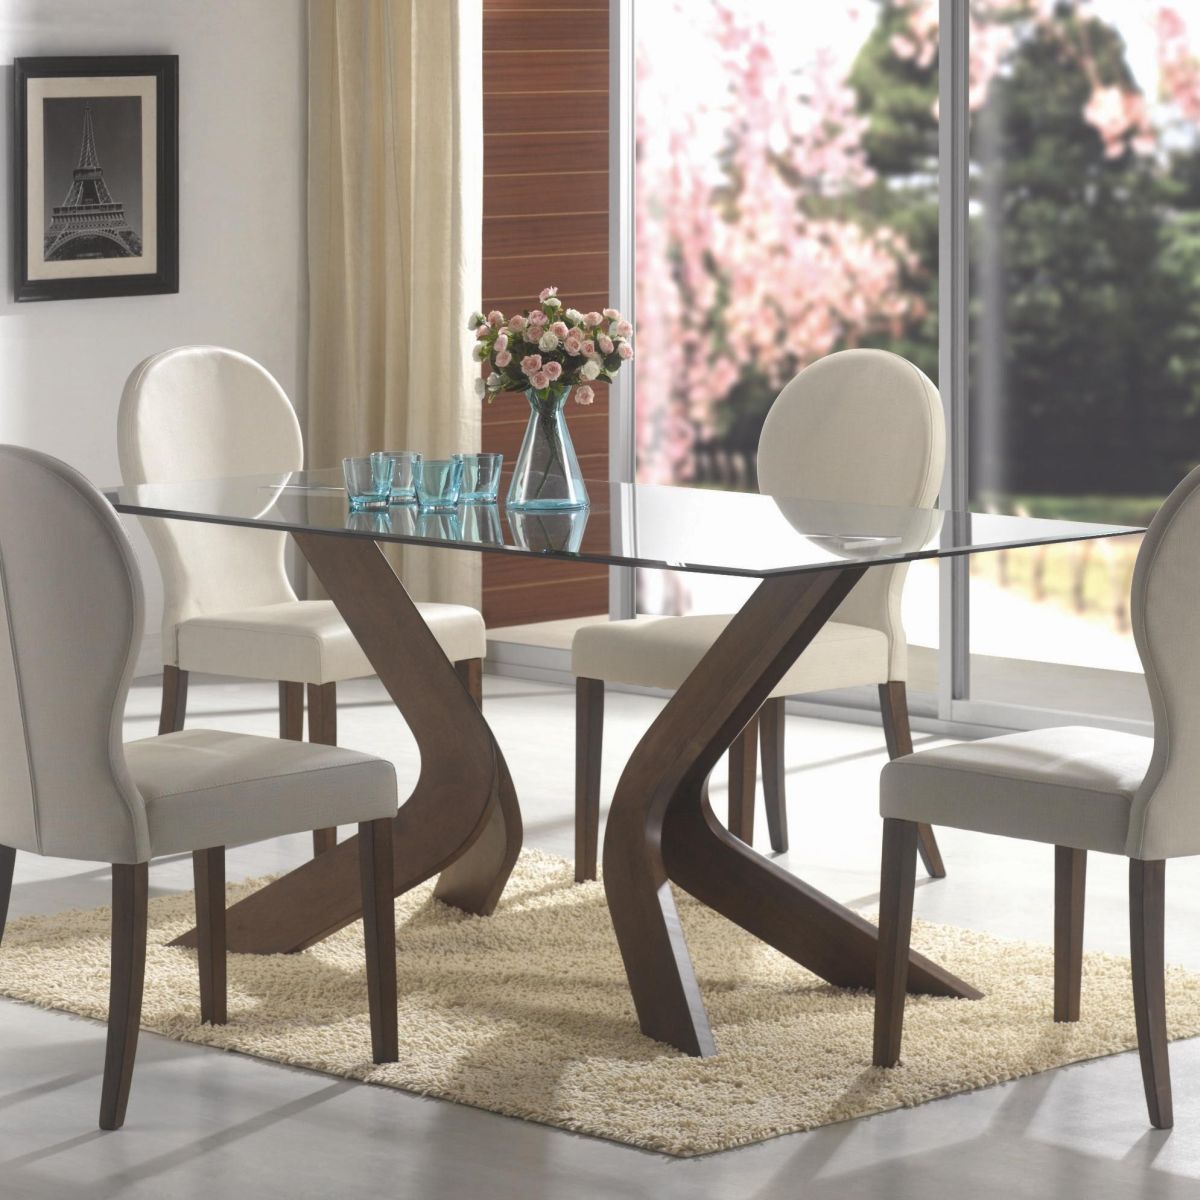 Oval back dining chairs and glass top table